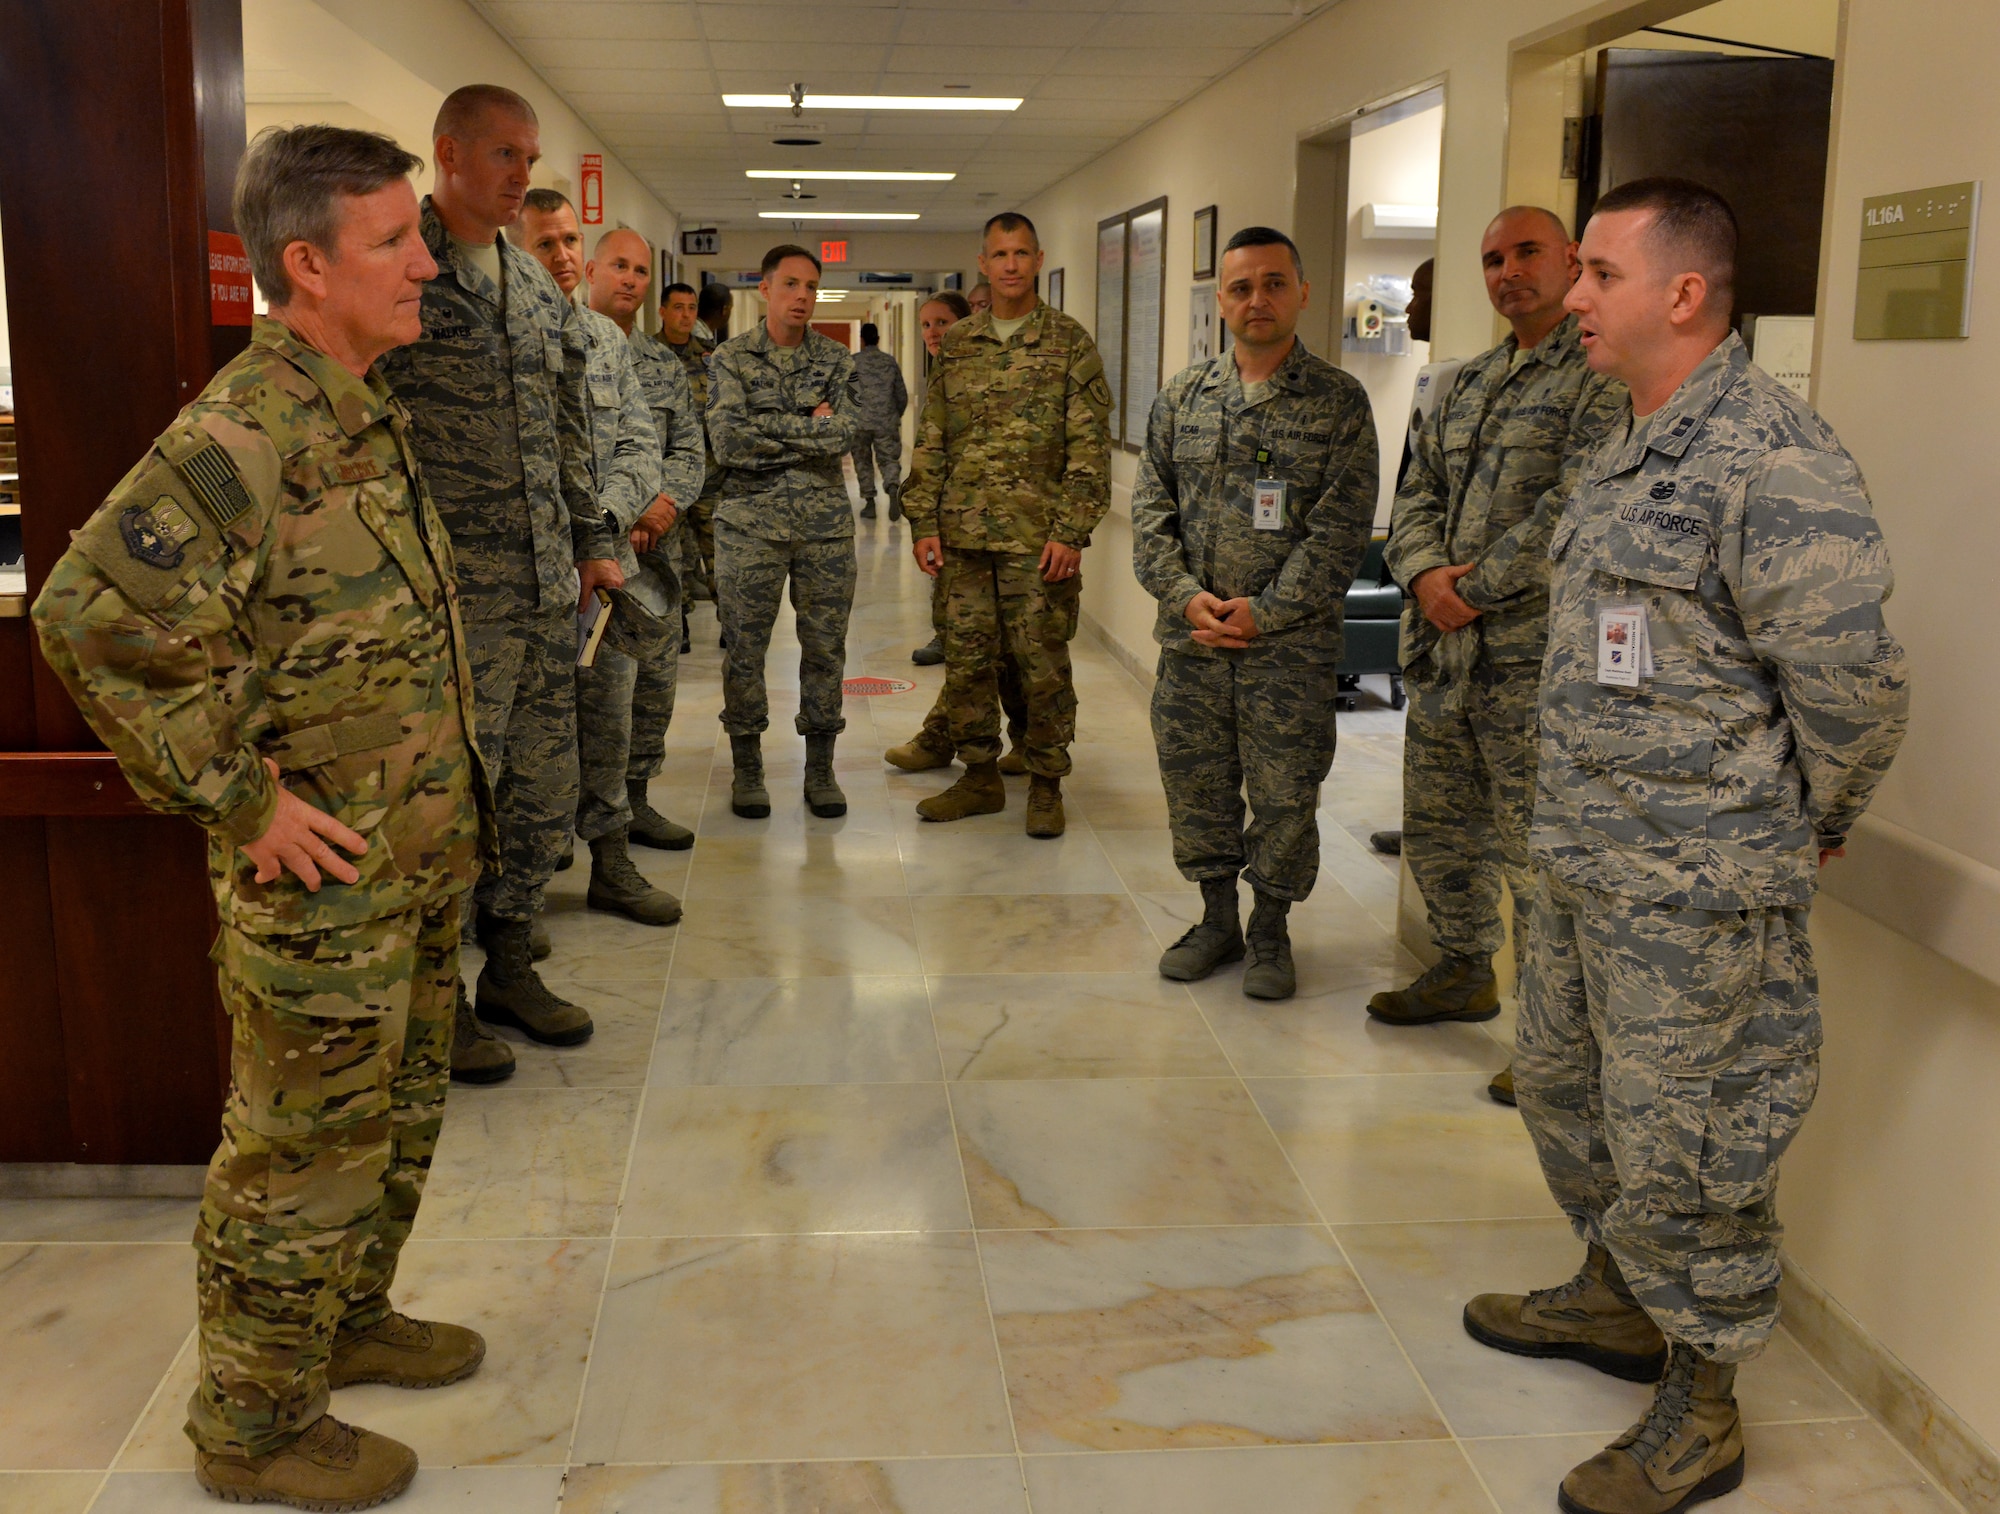 U.S. Air Force Gen. Hawk Carlisle, commander of Air Combat Command, visits members of the 39th Medical Group during a base visit Oct. 22, 2015, at Incirlik Air Base, Turkey. During his visit Carlisle received mission briefs, a tour of key facilities and met with service members. (U.S. Air Force photo by Senior Airman Michael Battles/Released)